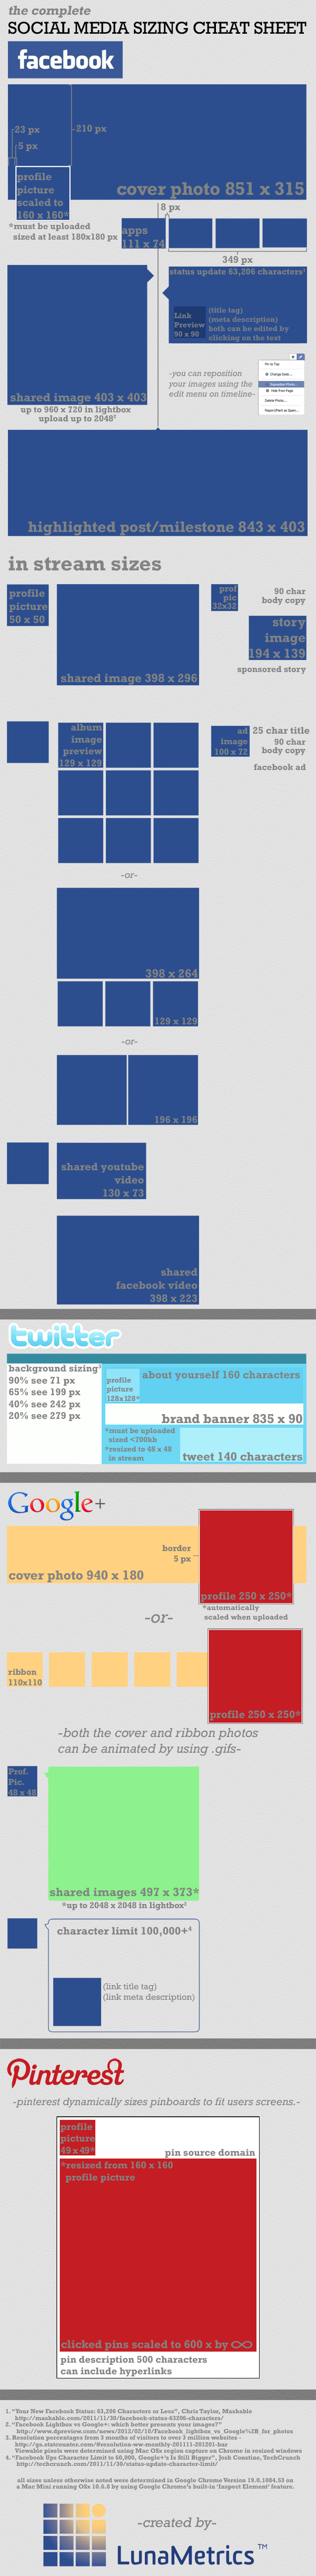 social media sizing infographic